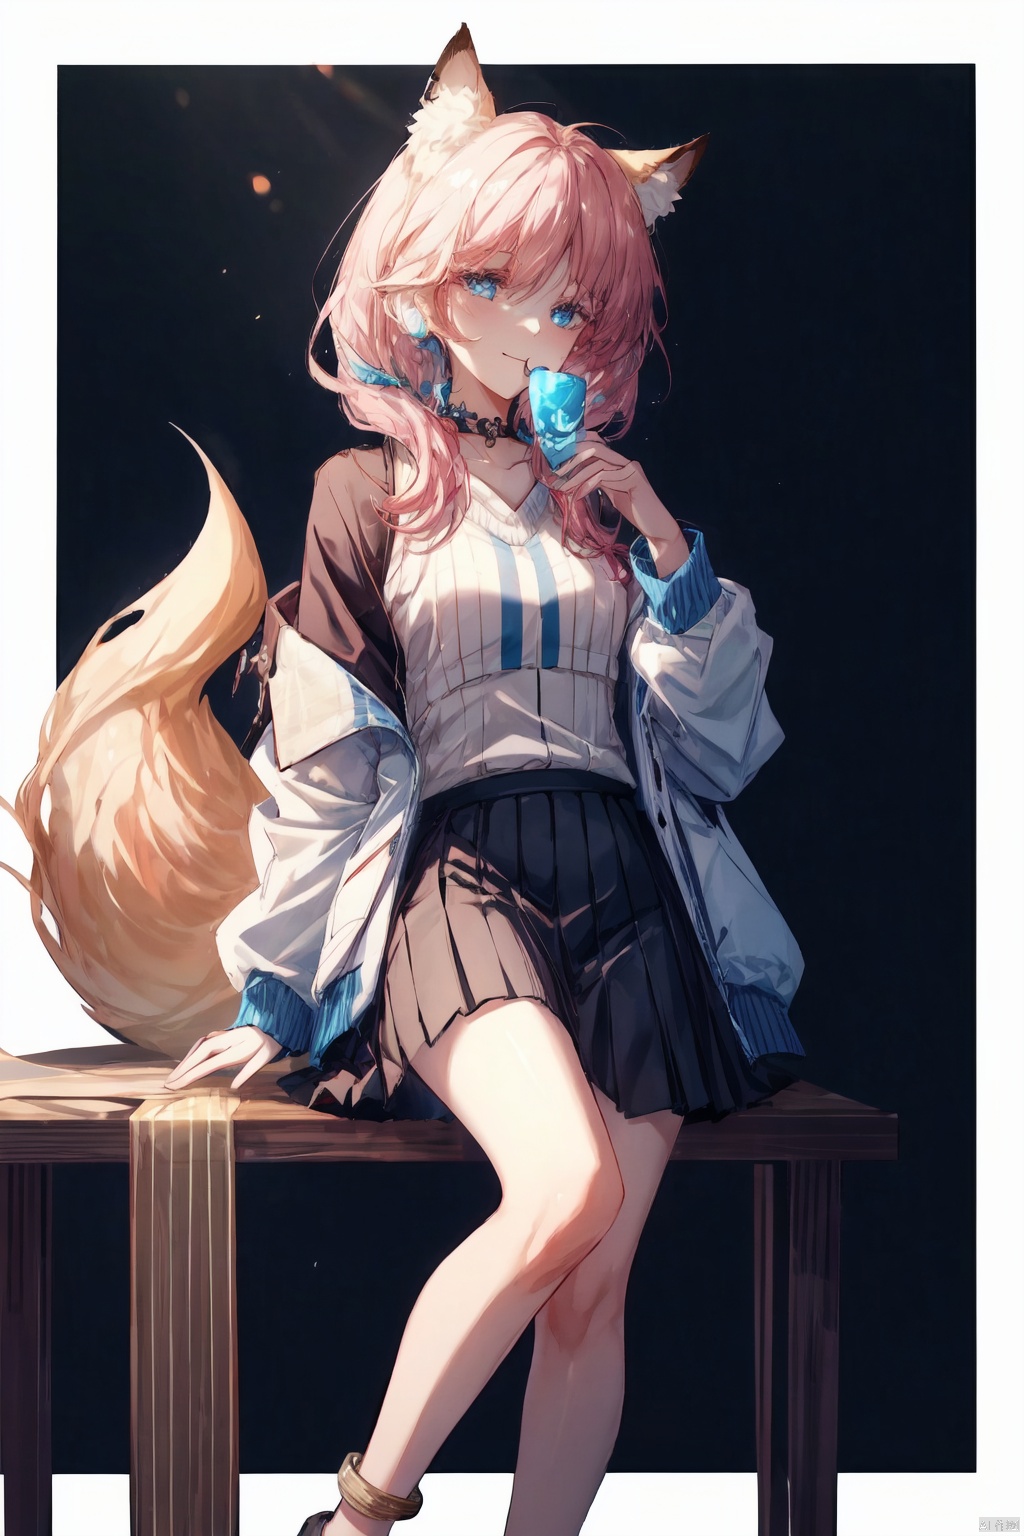 Clothing, animal, ear, plush, animal, ear, anklets, hair, shirt, brown sweater, sweater, closed, mouth, colorful, ear, girl, background, skirt, high-rise, kitsune, kyuubi, multi-color, hair, shirt, simple, background, skirt, smile, zuran, (anklets), hair, ((poakl)),, detailed, blue_poison_(arknights)